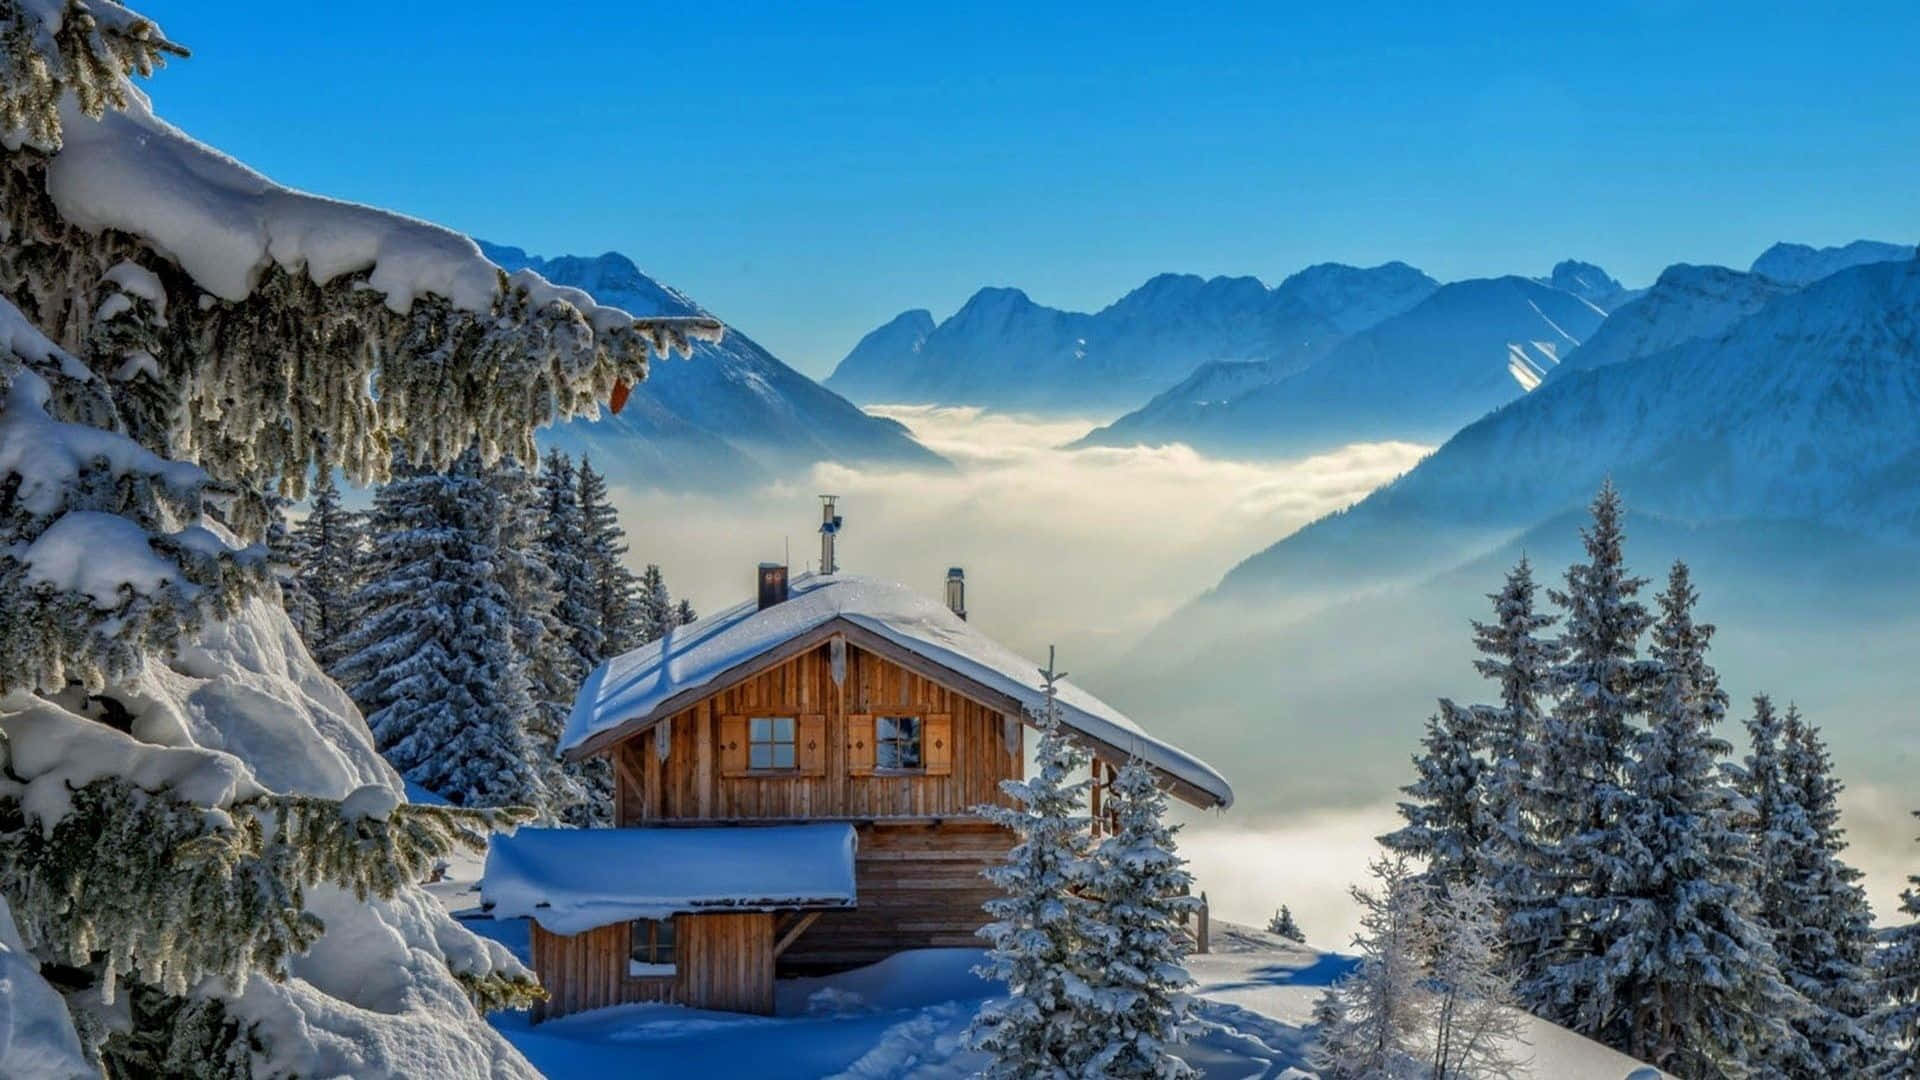 A Beautiful Winter Scene of Snow-Covered Mountains